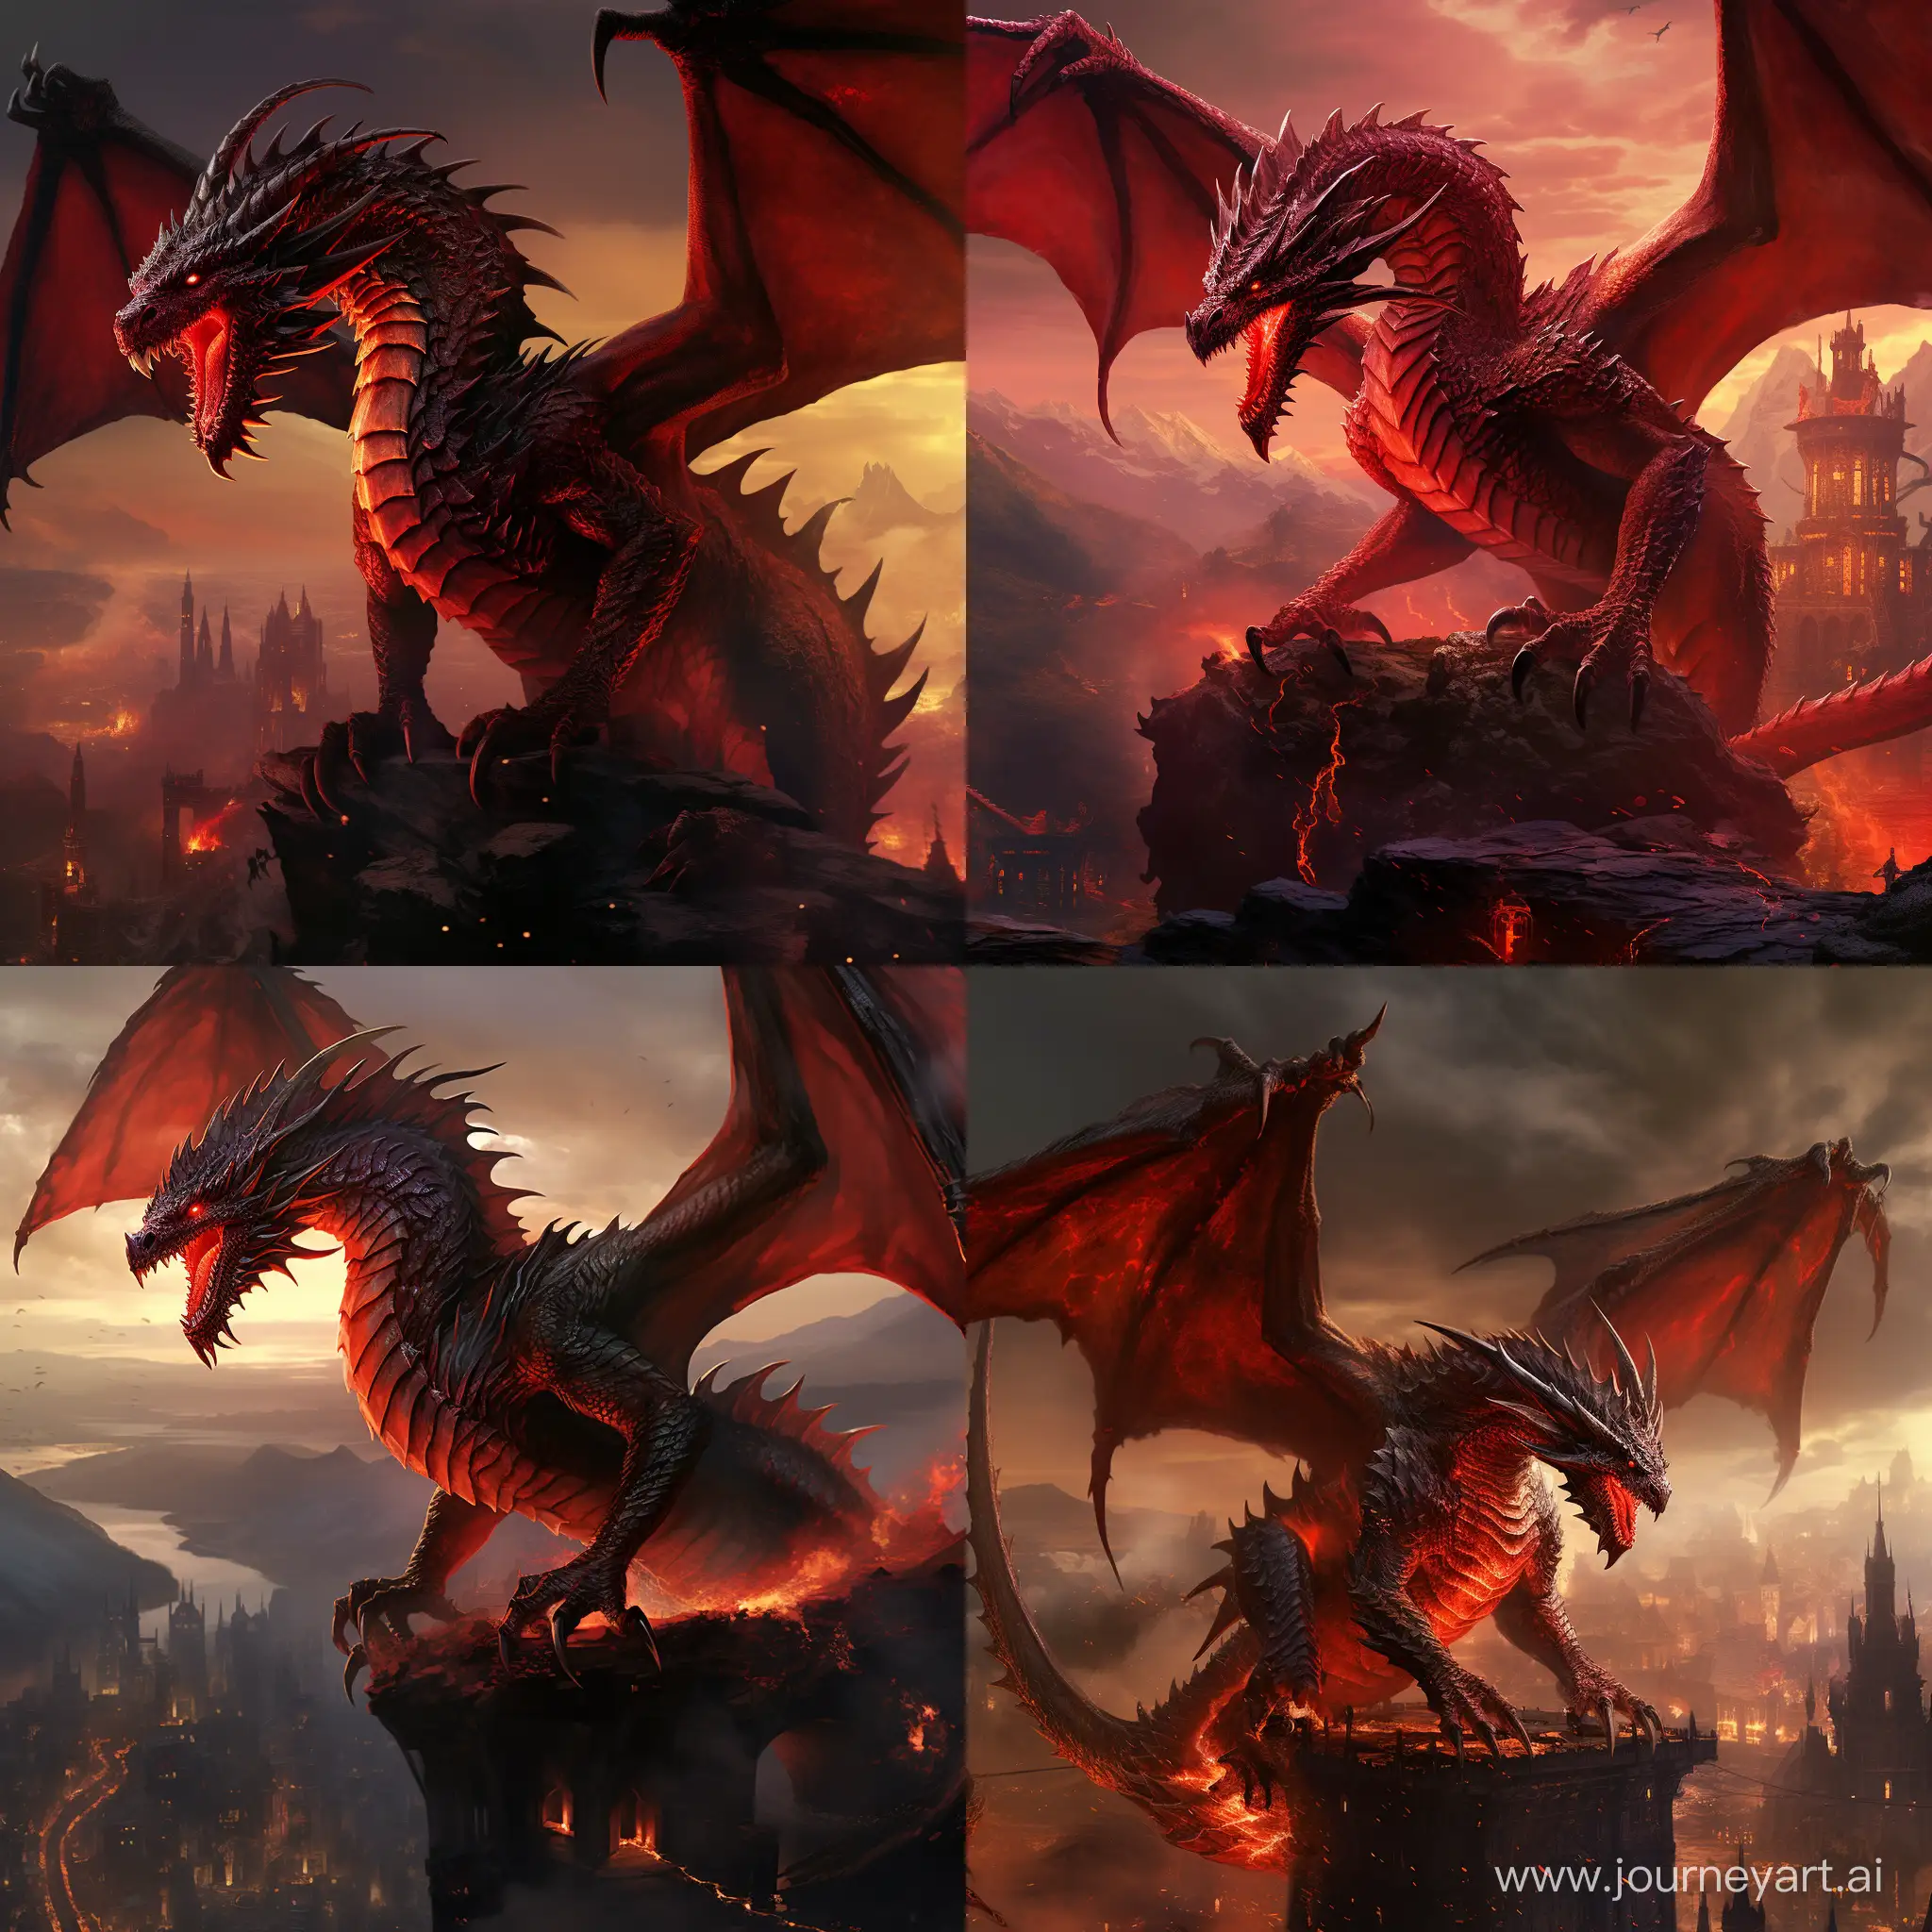 Create a high-octane visual of a crimson dragon with meticulously detailed scales, gleaming under the fiery glow of its own breath. The vivid red hues should emphasize the dragon's power and intensity as it soars through a tumultuous sky, leaving a trail of sparks and embers against a backdrop of smoldering ruins and a city consumed by chaos